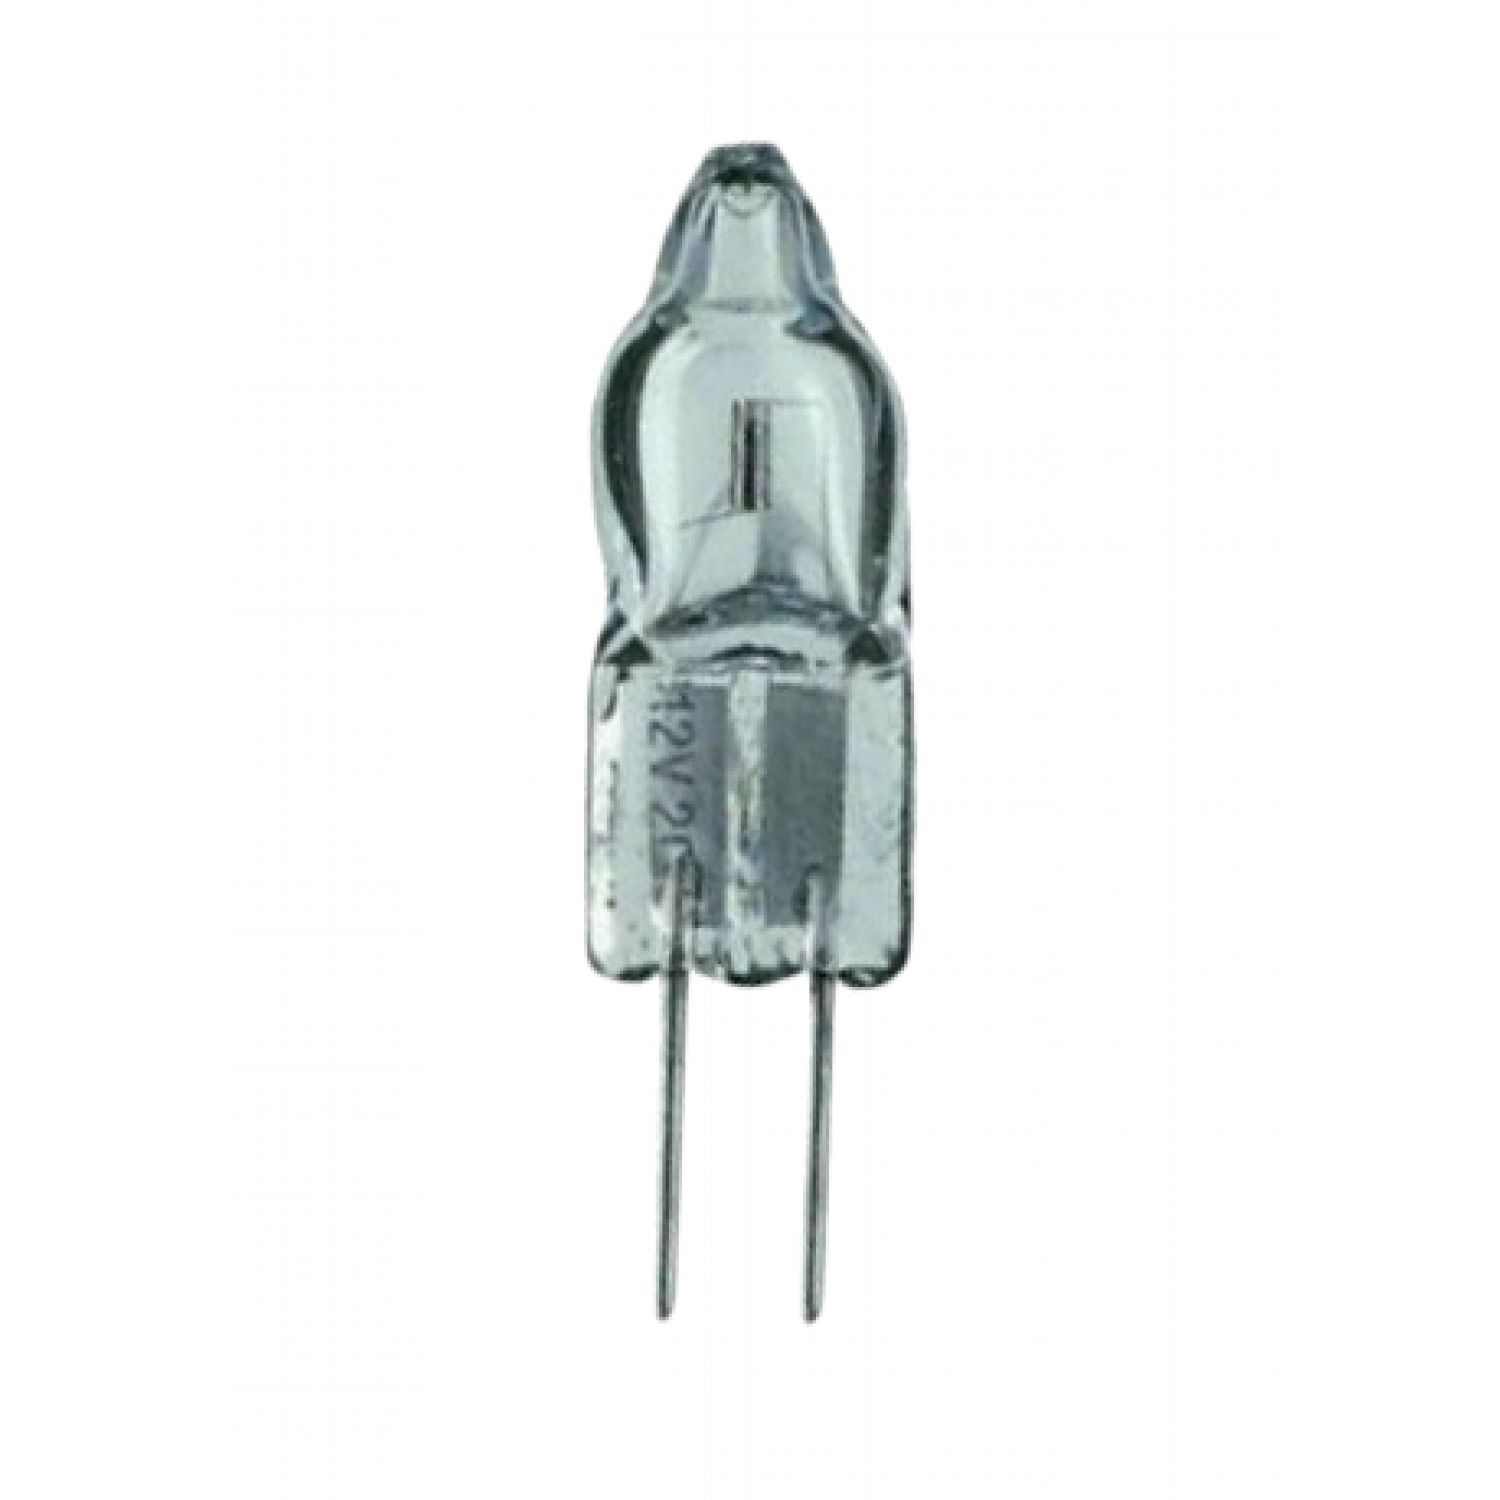 https://www.mygreenlighting.co.uk/images/products/white/12v-10w-halogen-g4-capsule-bulb-2700k-dimmable-90lm-clear-300-c-939-1500x1500-p927-v1592586180.jpg